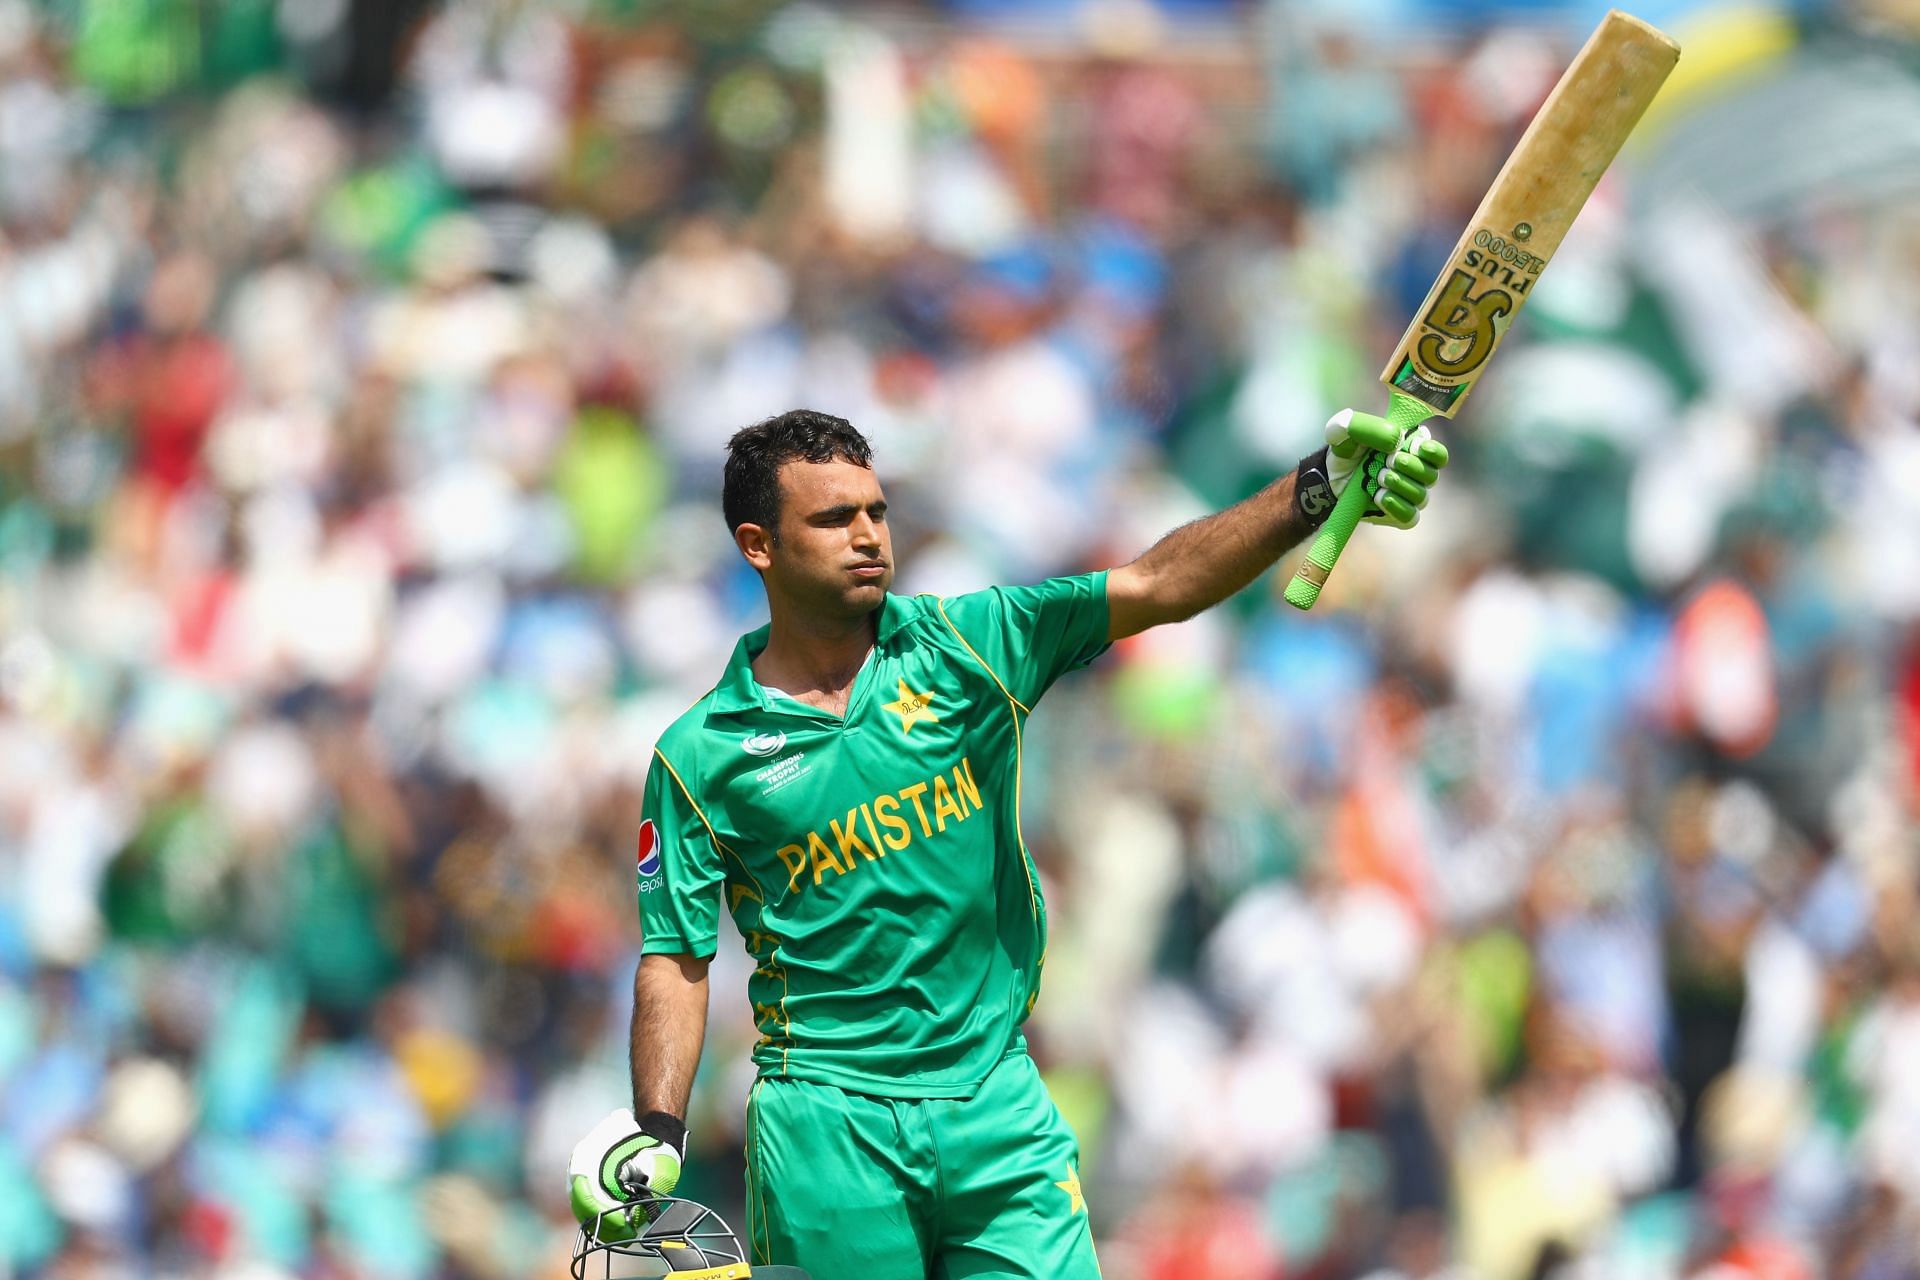 Fakhar Zaman scored a century against India in the 2017 ICC Champions Trophy final.